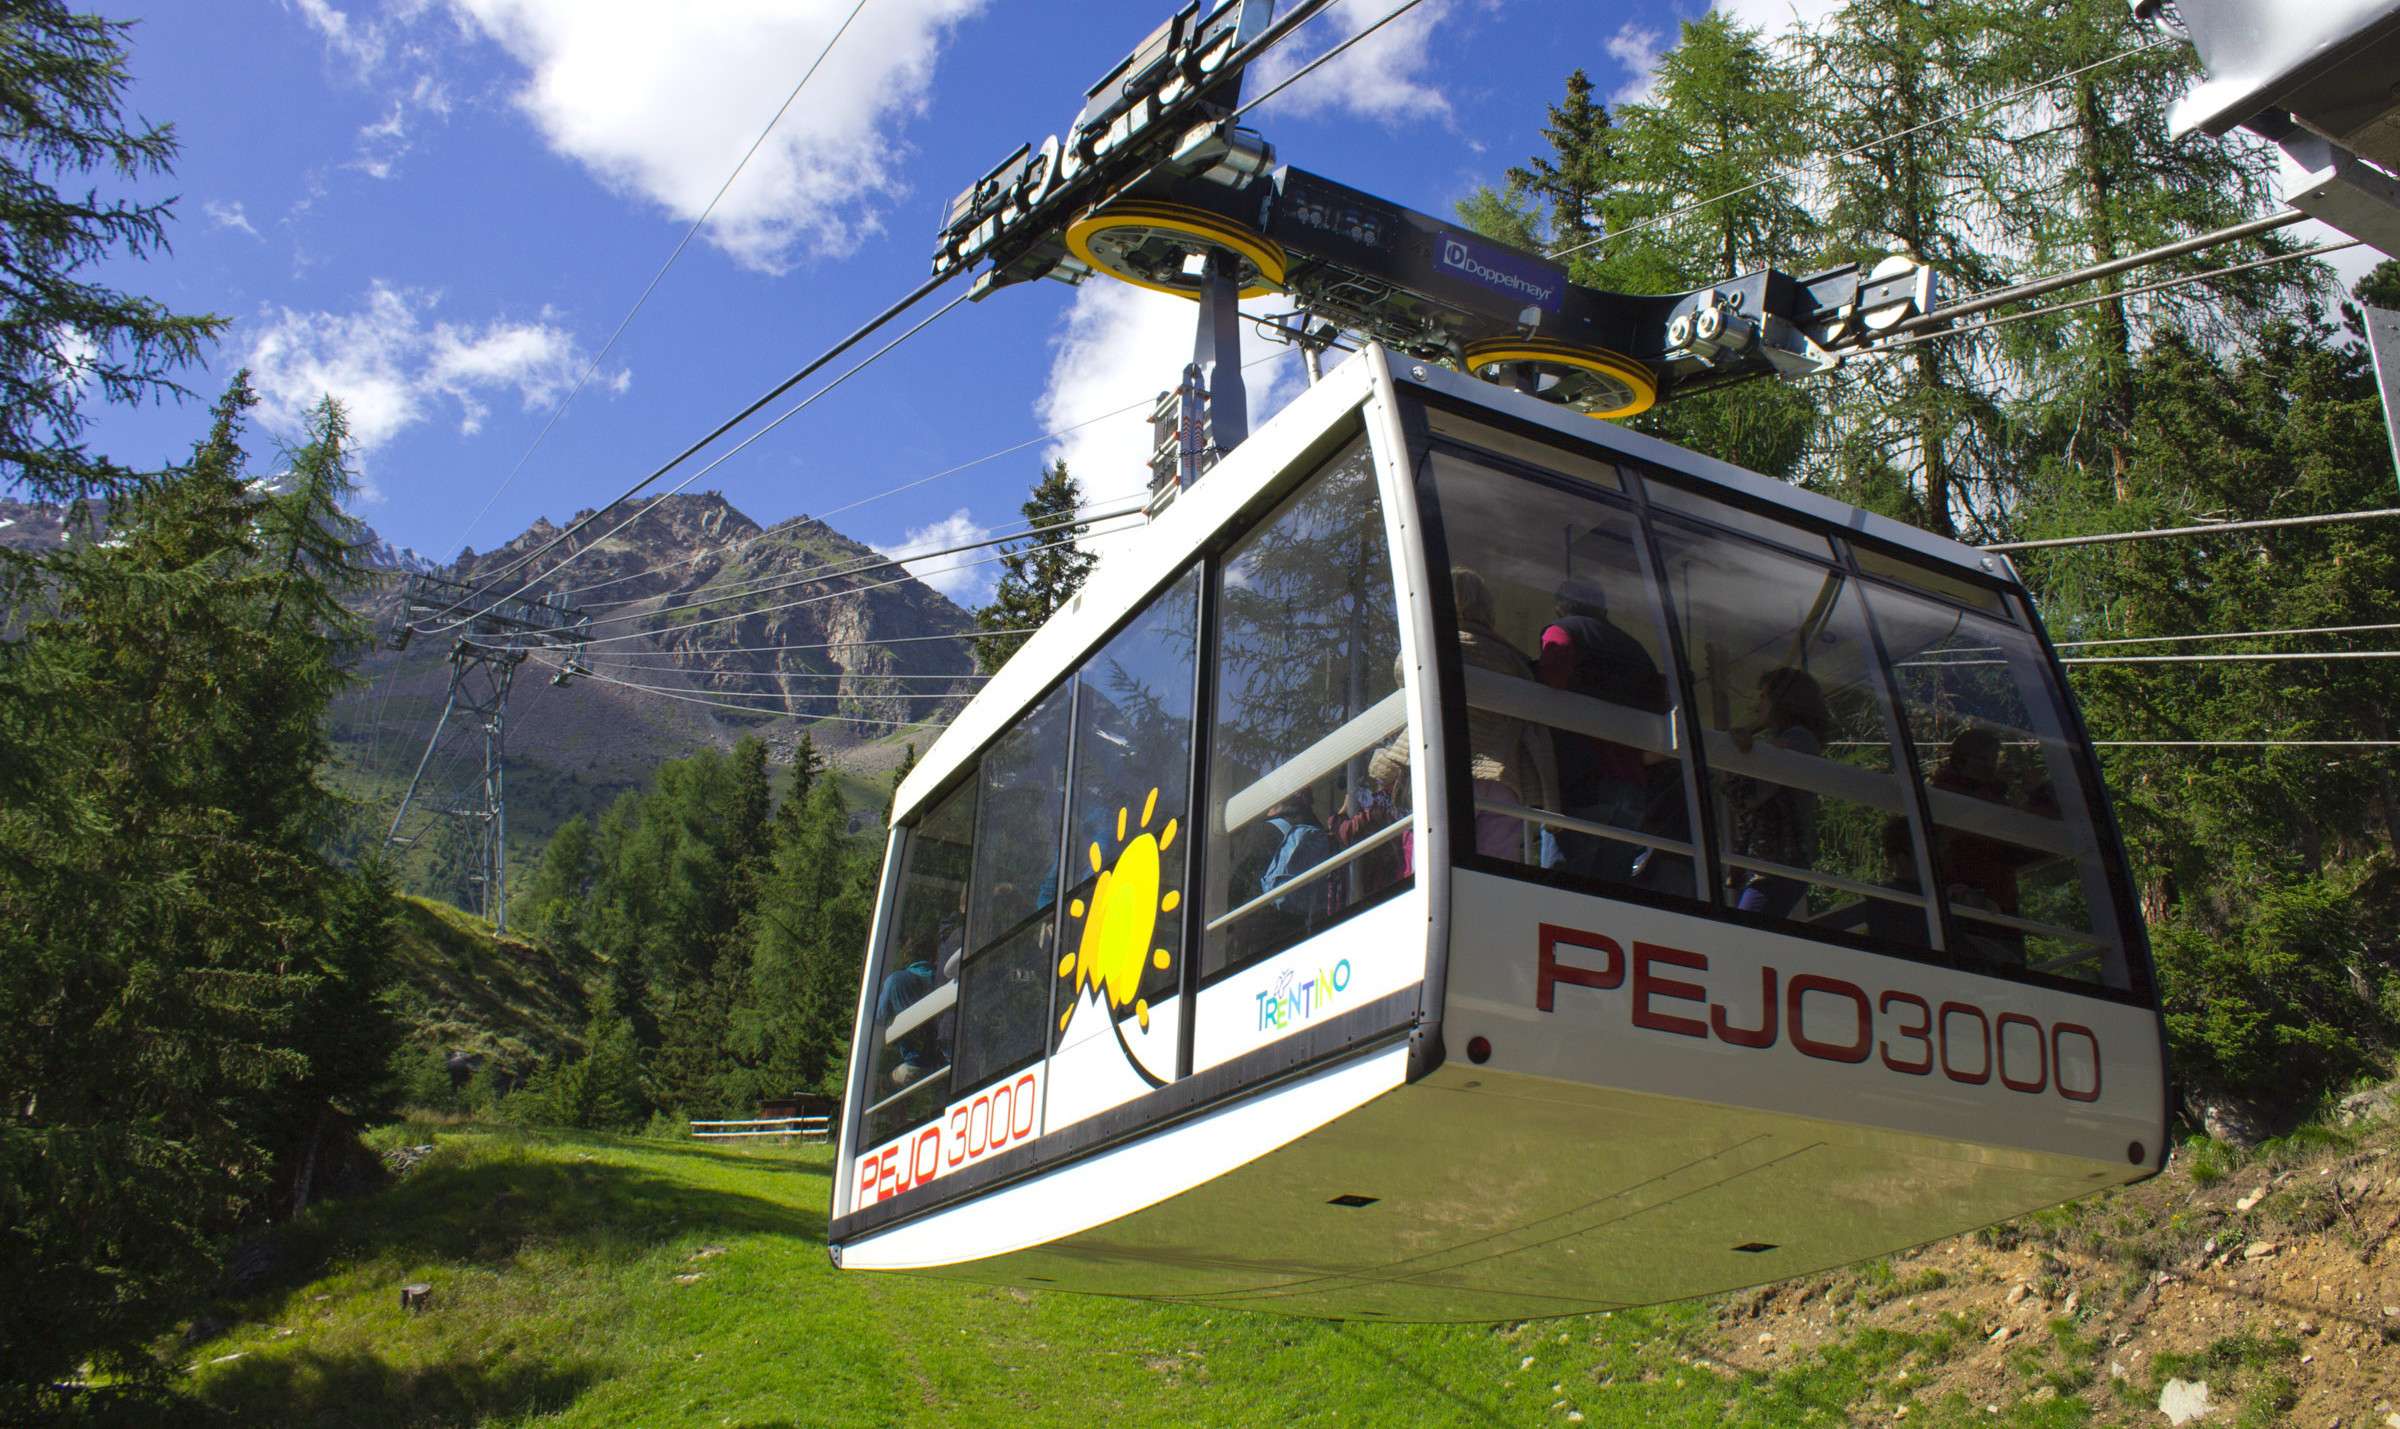 Get in the cable car up to 3000 meters